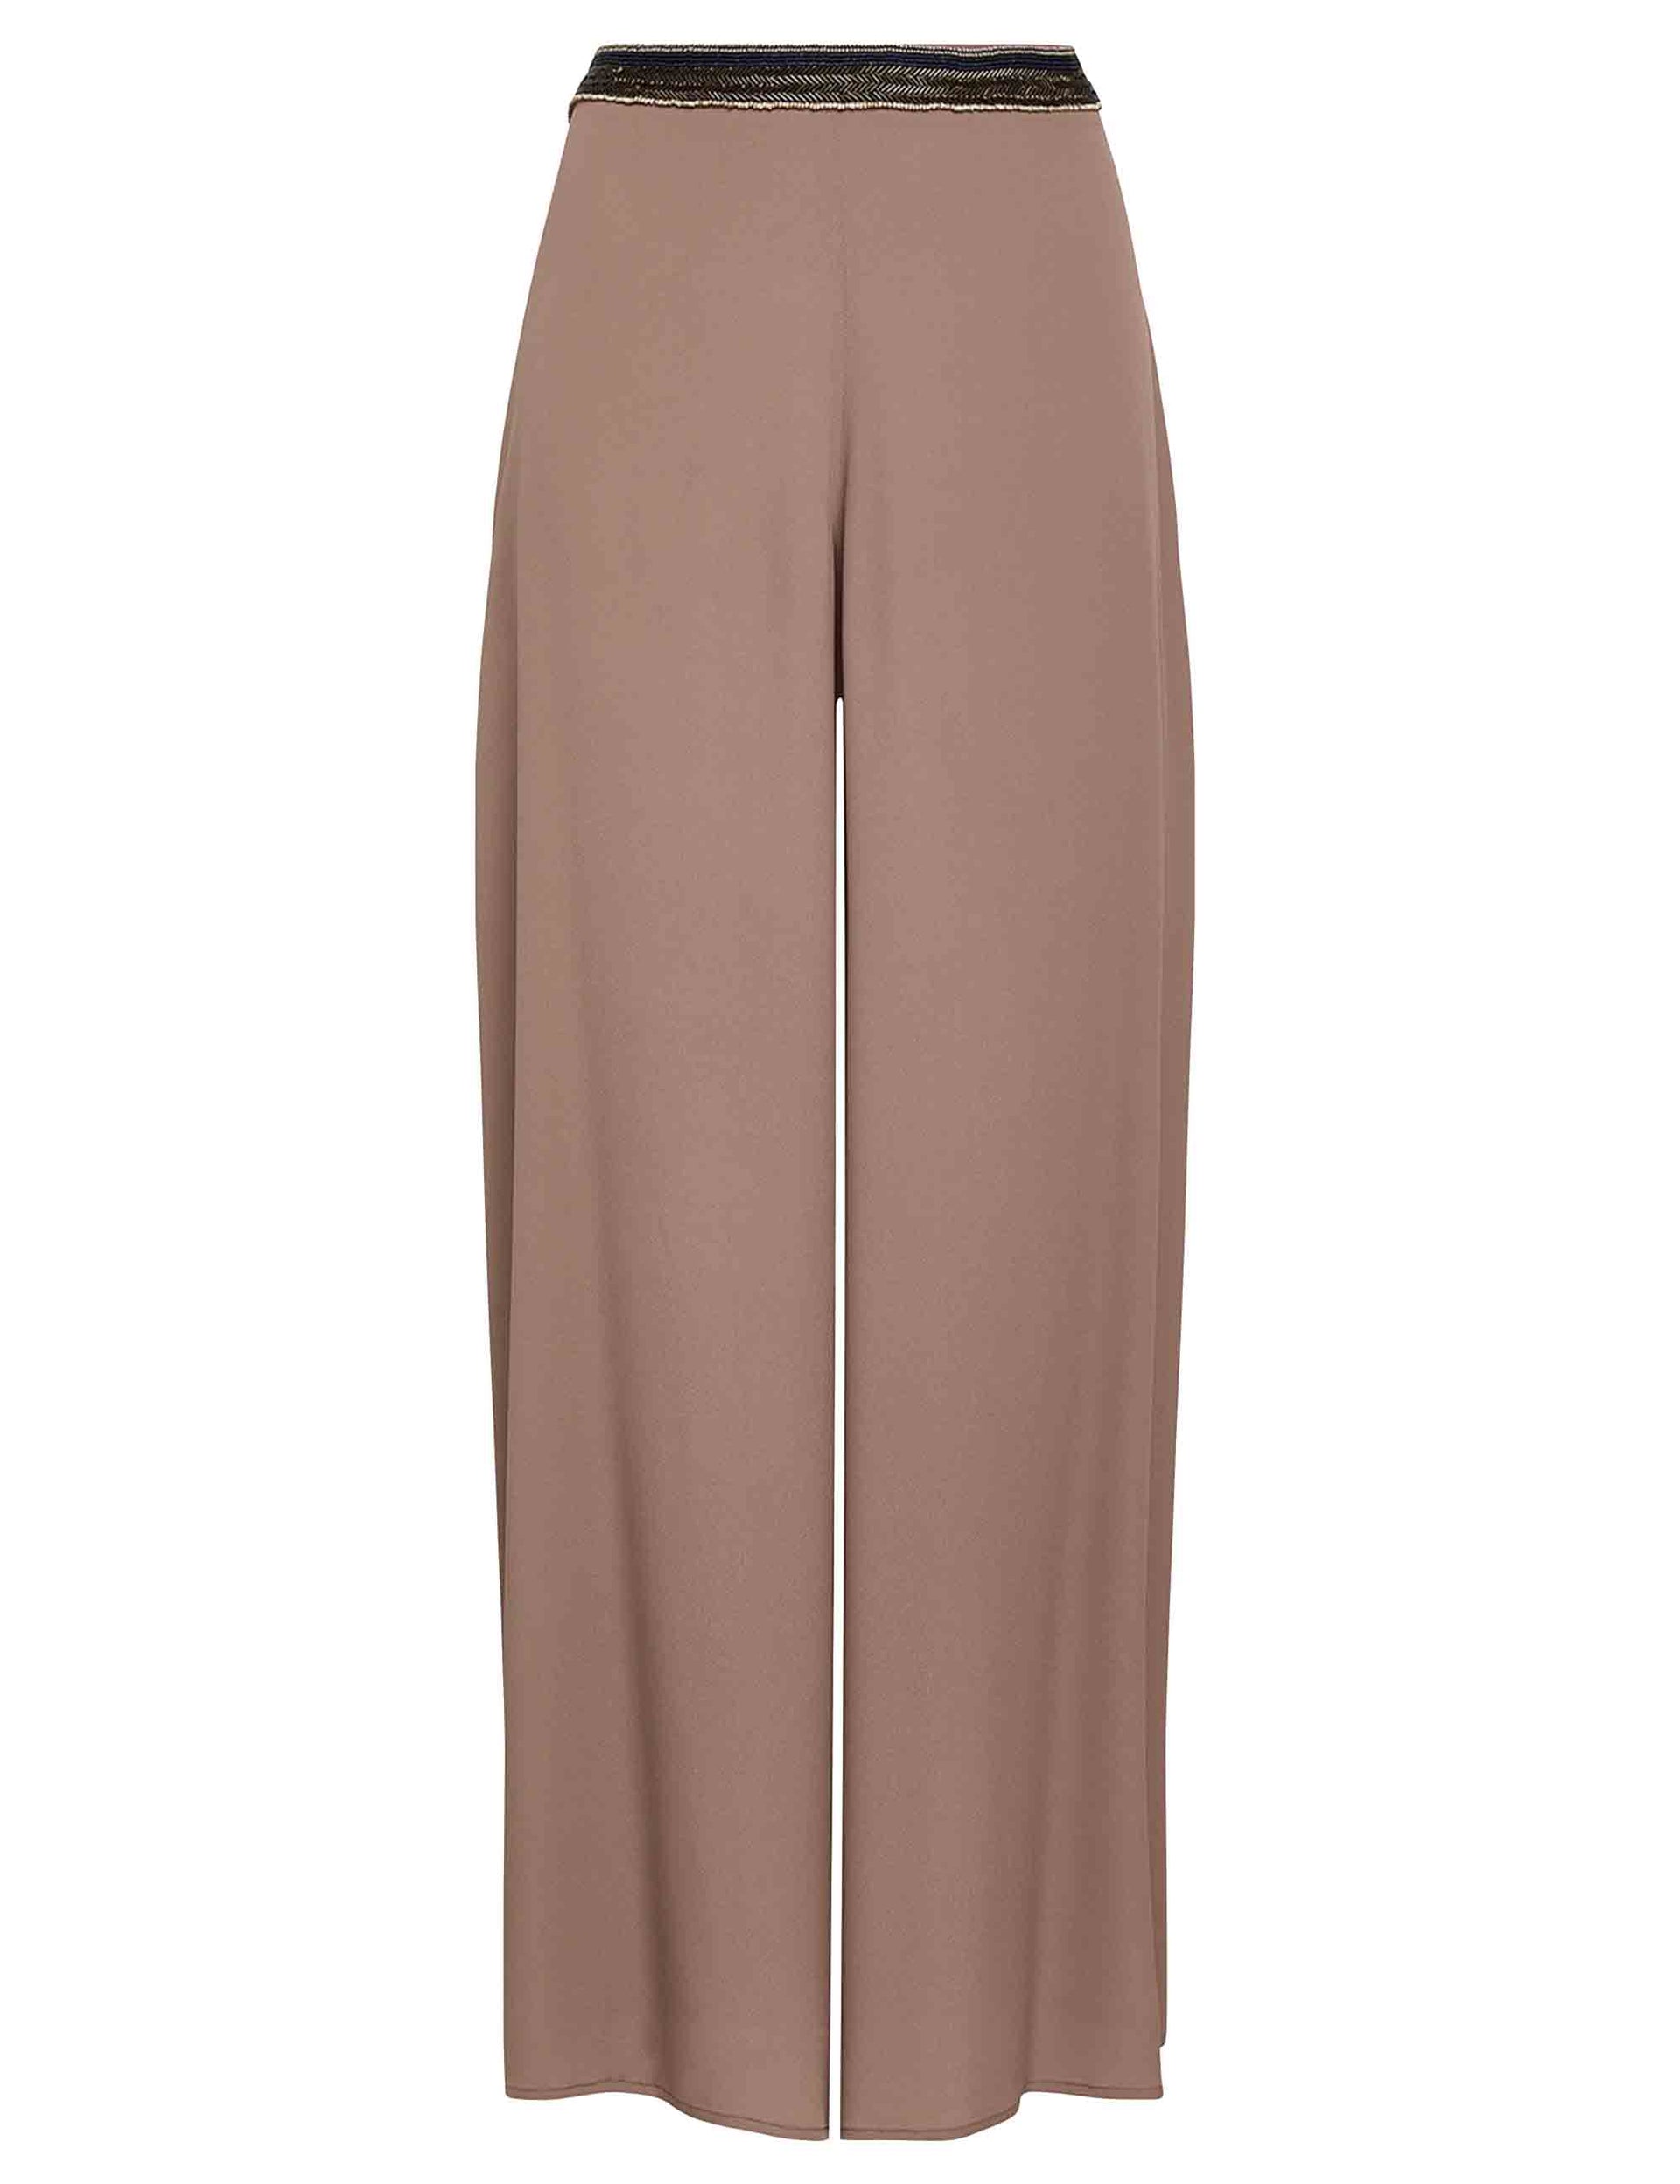 Fluide Crepe women's trousers in walnut silk with embroidered belt